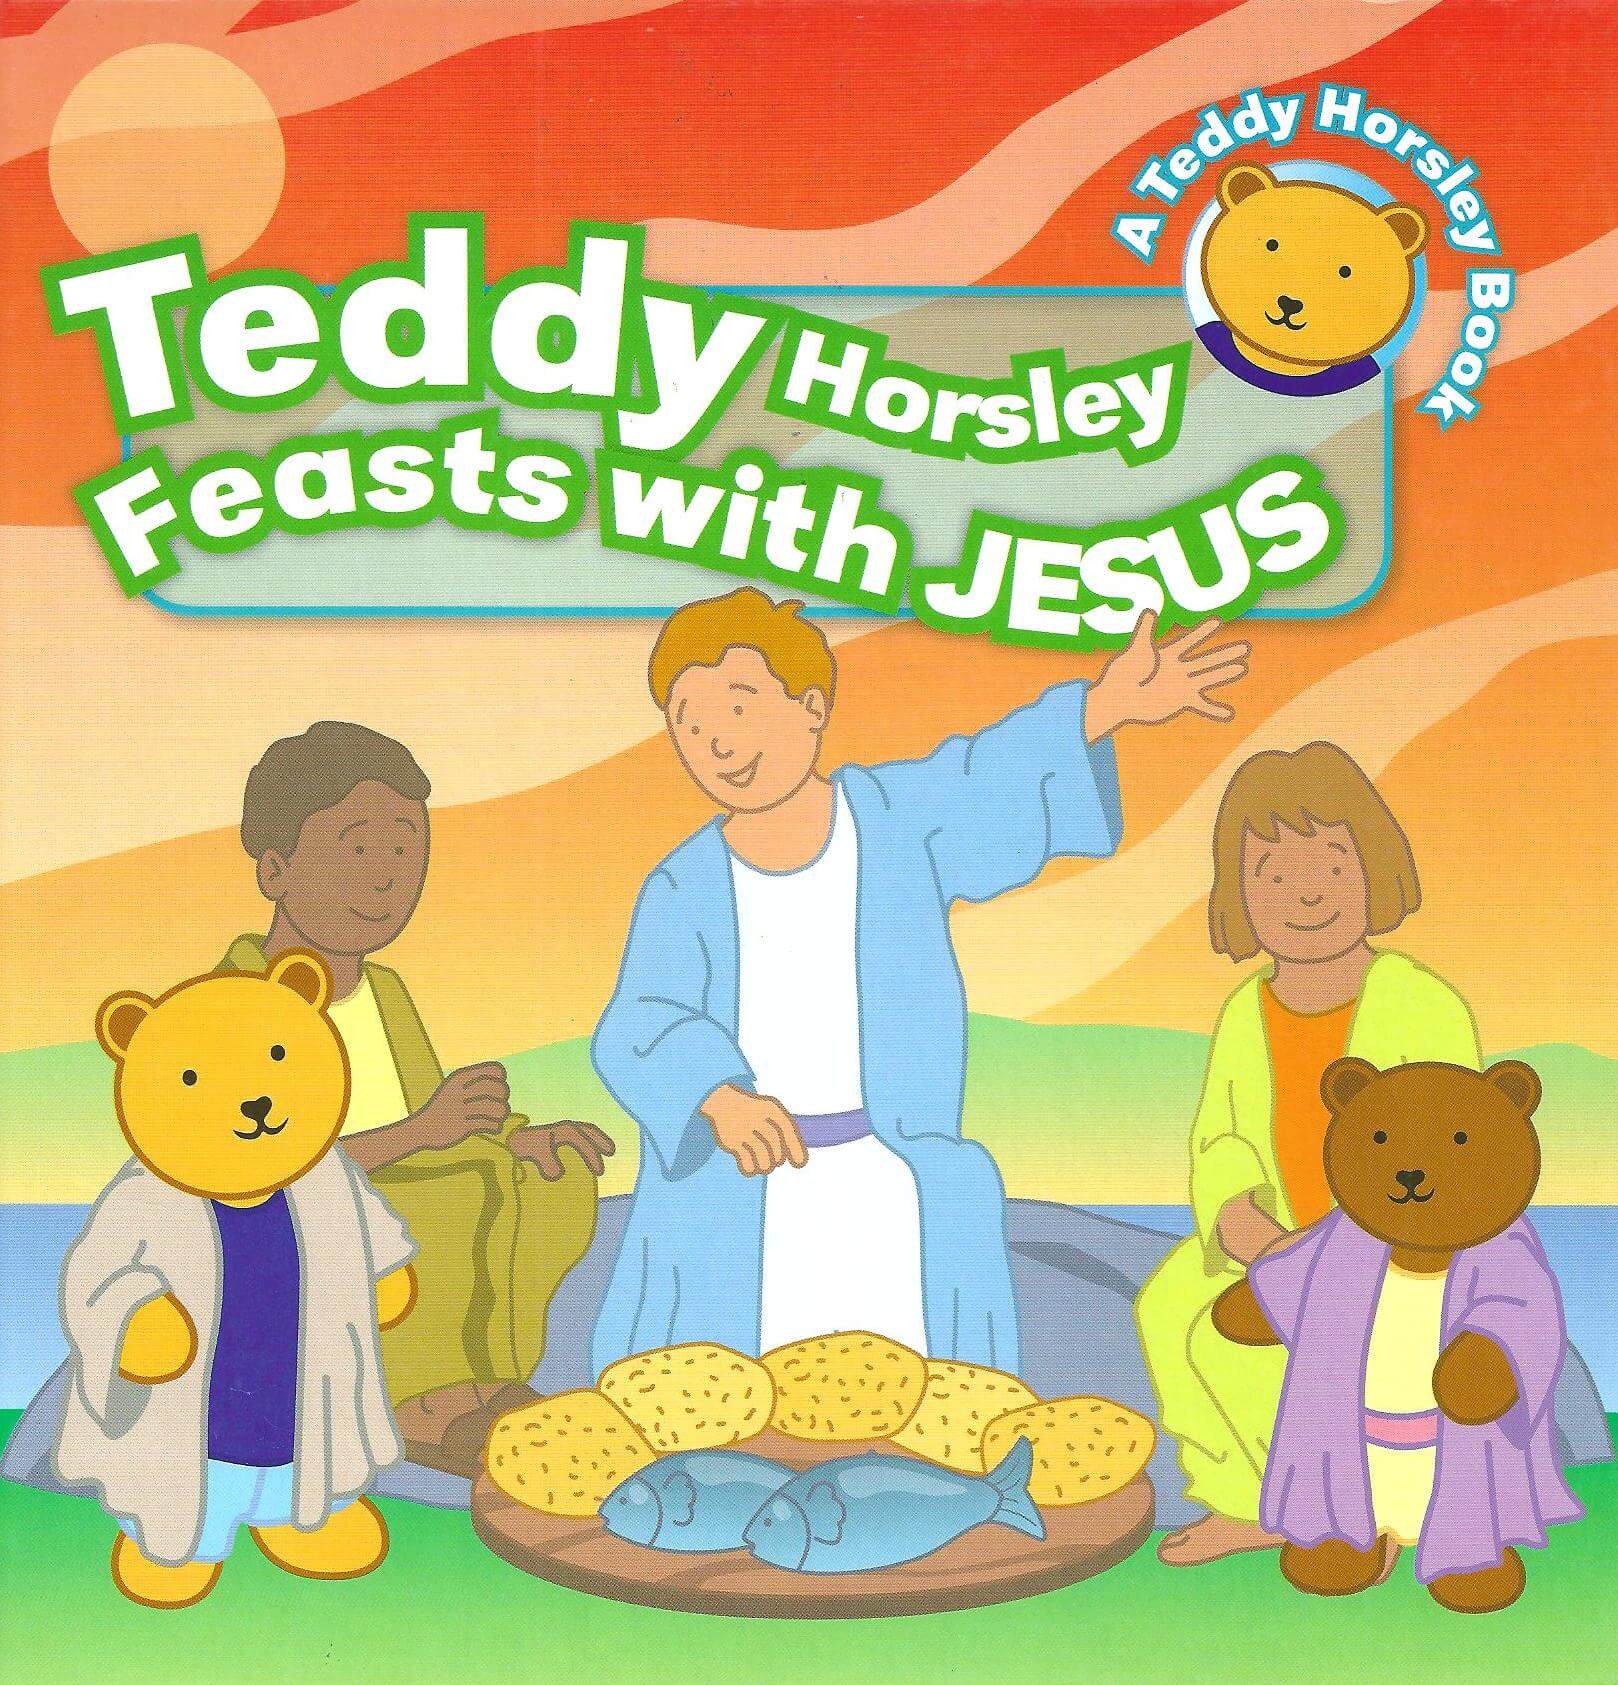 Teddy Horsley feasts with Jesus